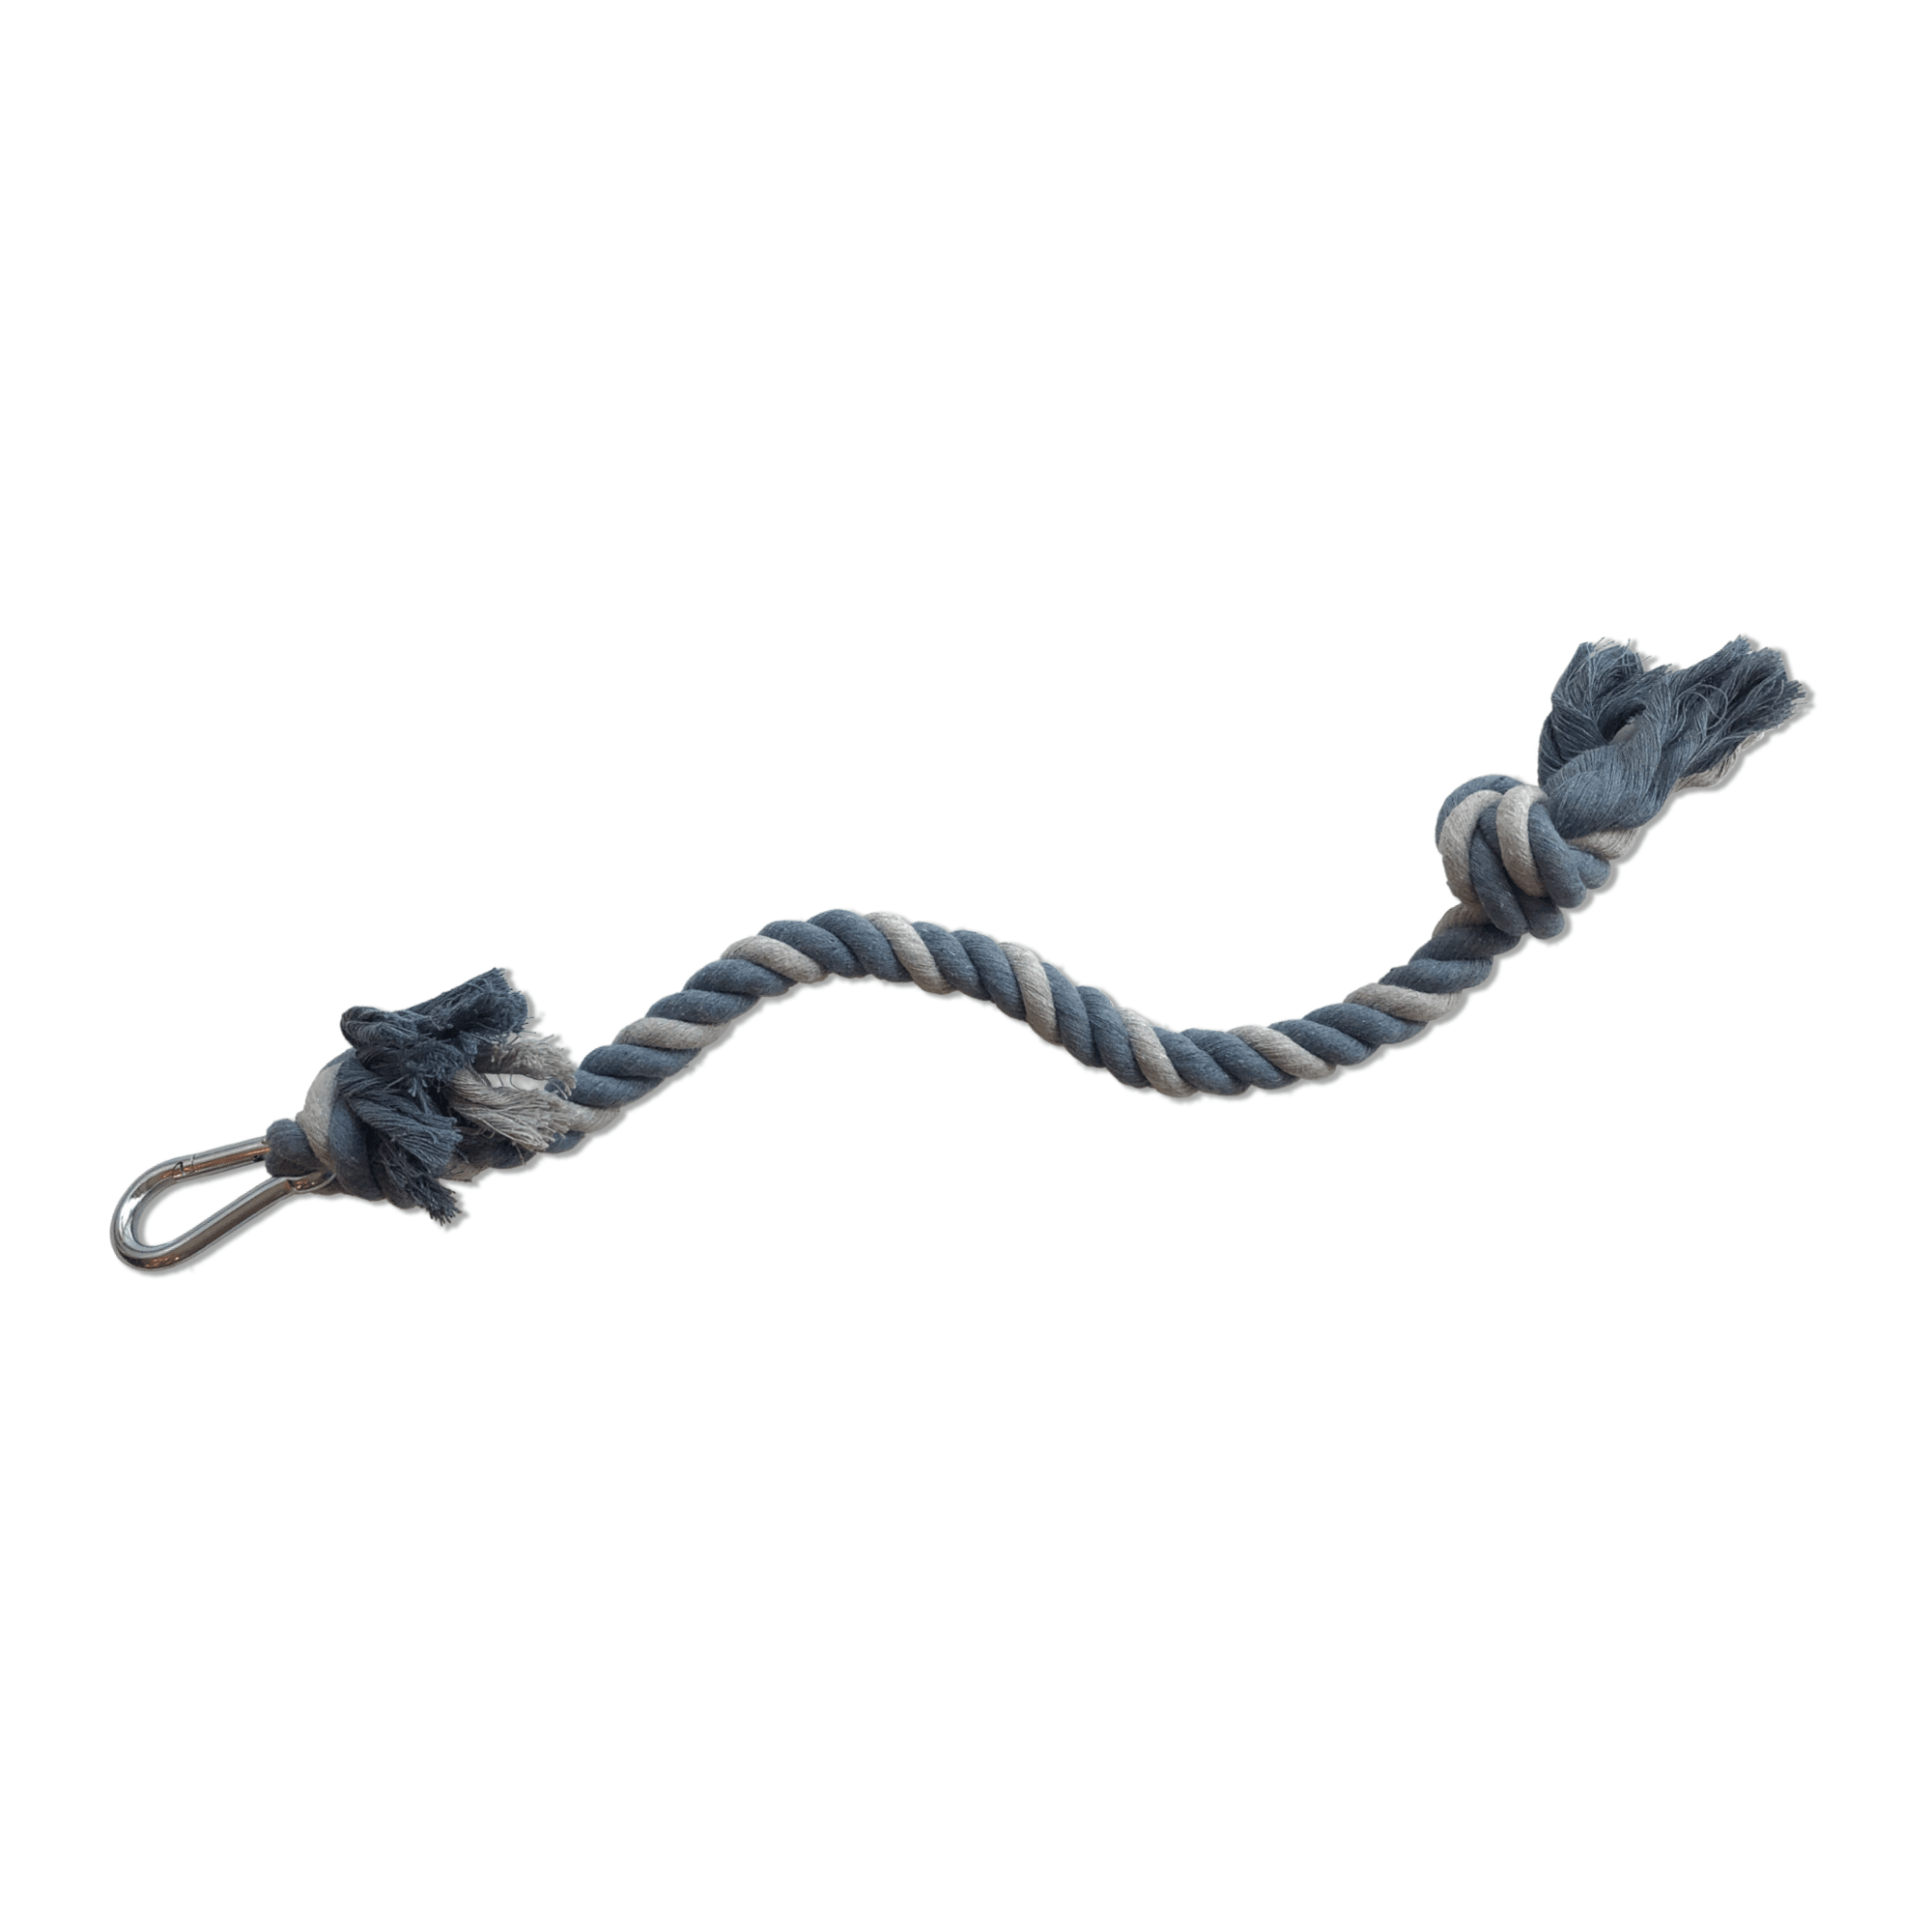 Knotted Rope Toy - Tether Tug